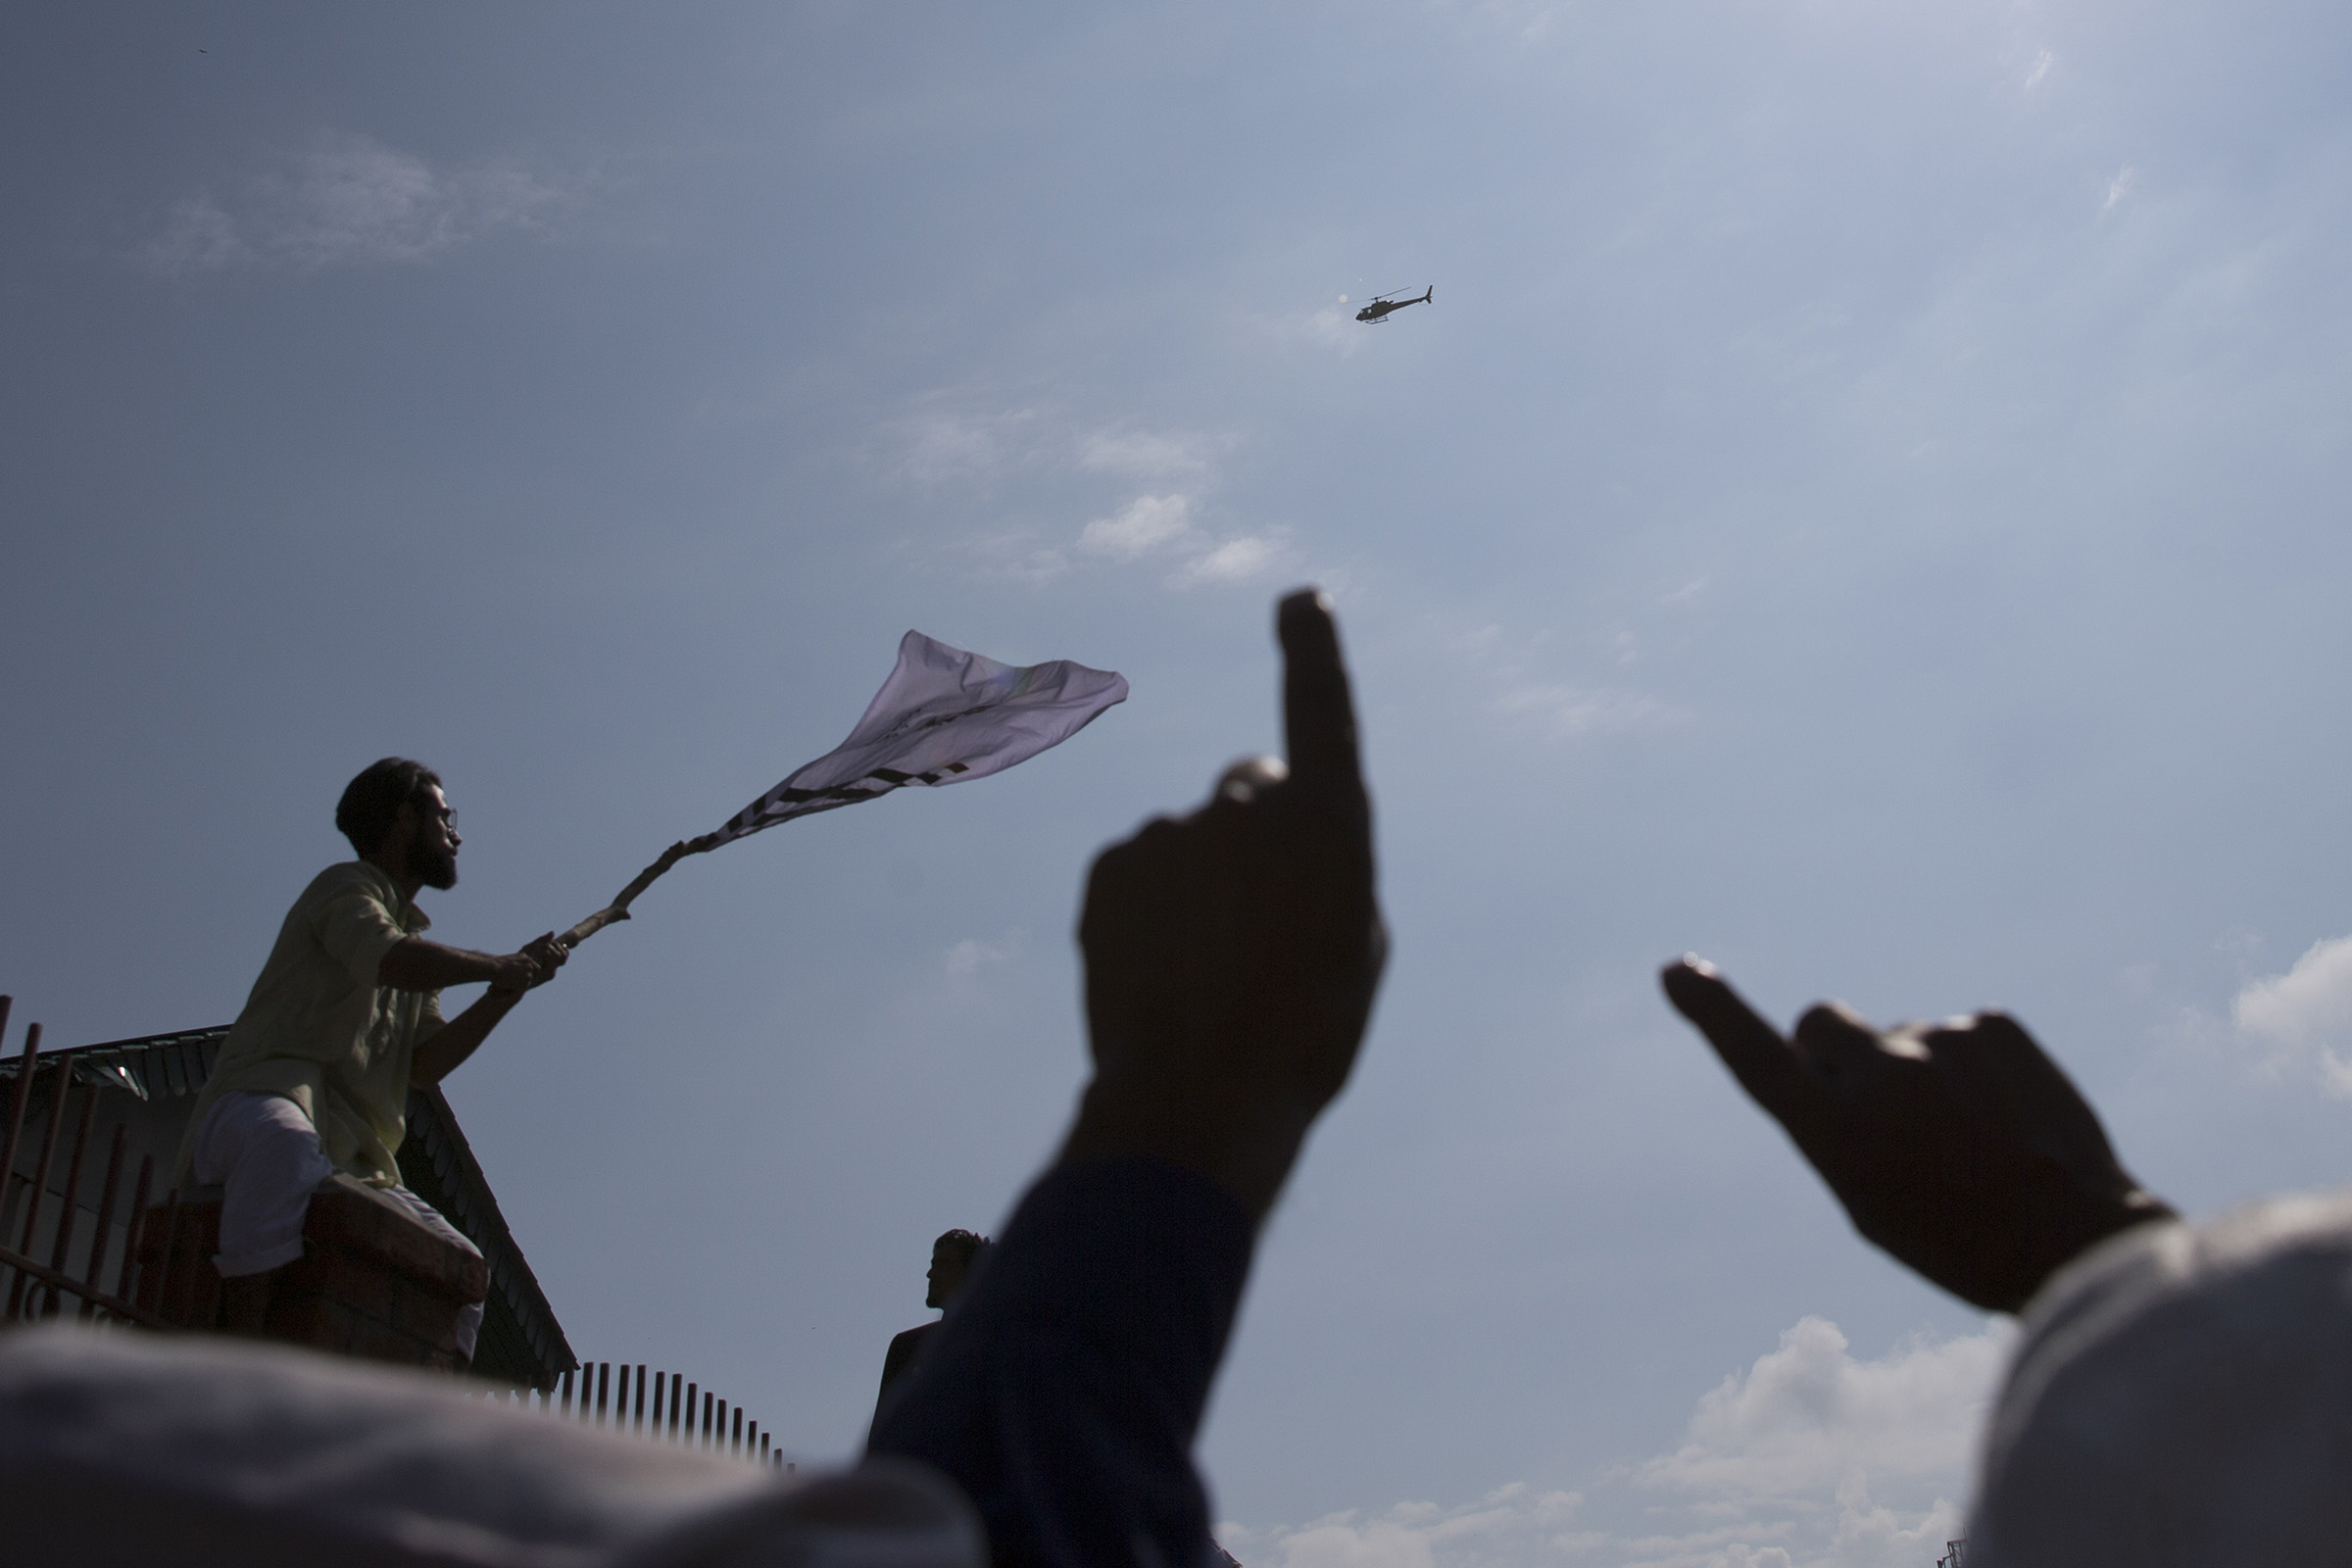 A Kashmiri protester waves a flag as Indian authorities in a helicopter monitor a protest after Eid prayers in Srinagar, Indian controlled Kashmir, on Aug. 12, 2019. (Dar Yasin—AP)